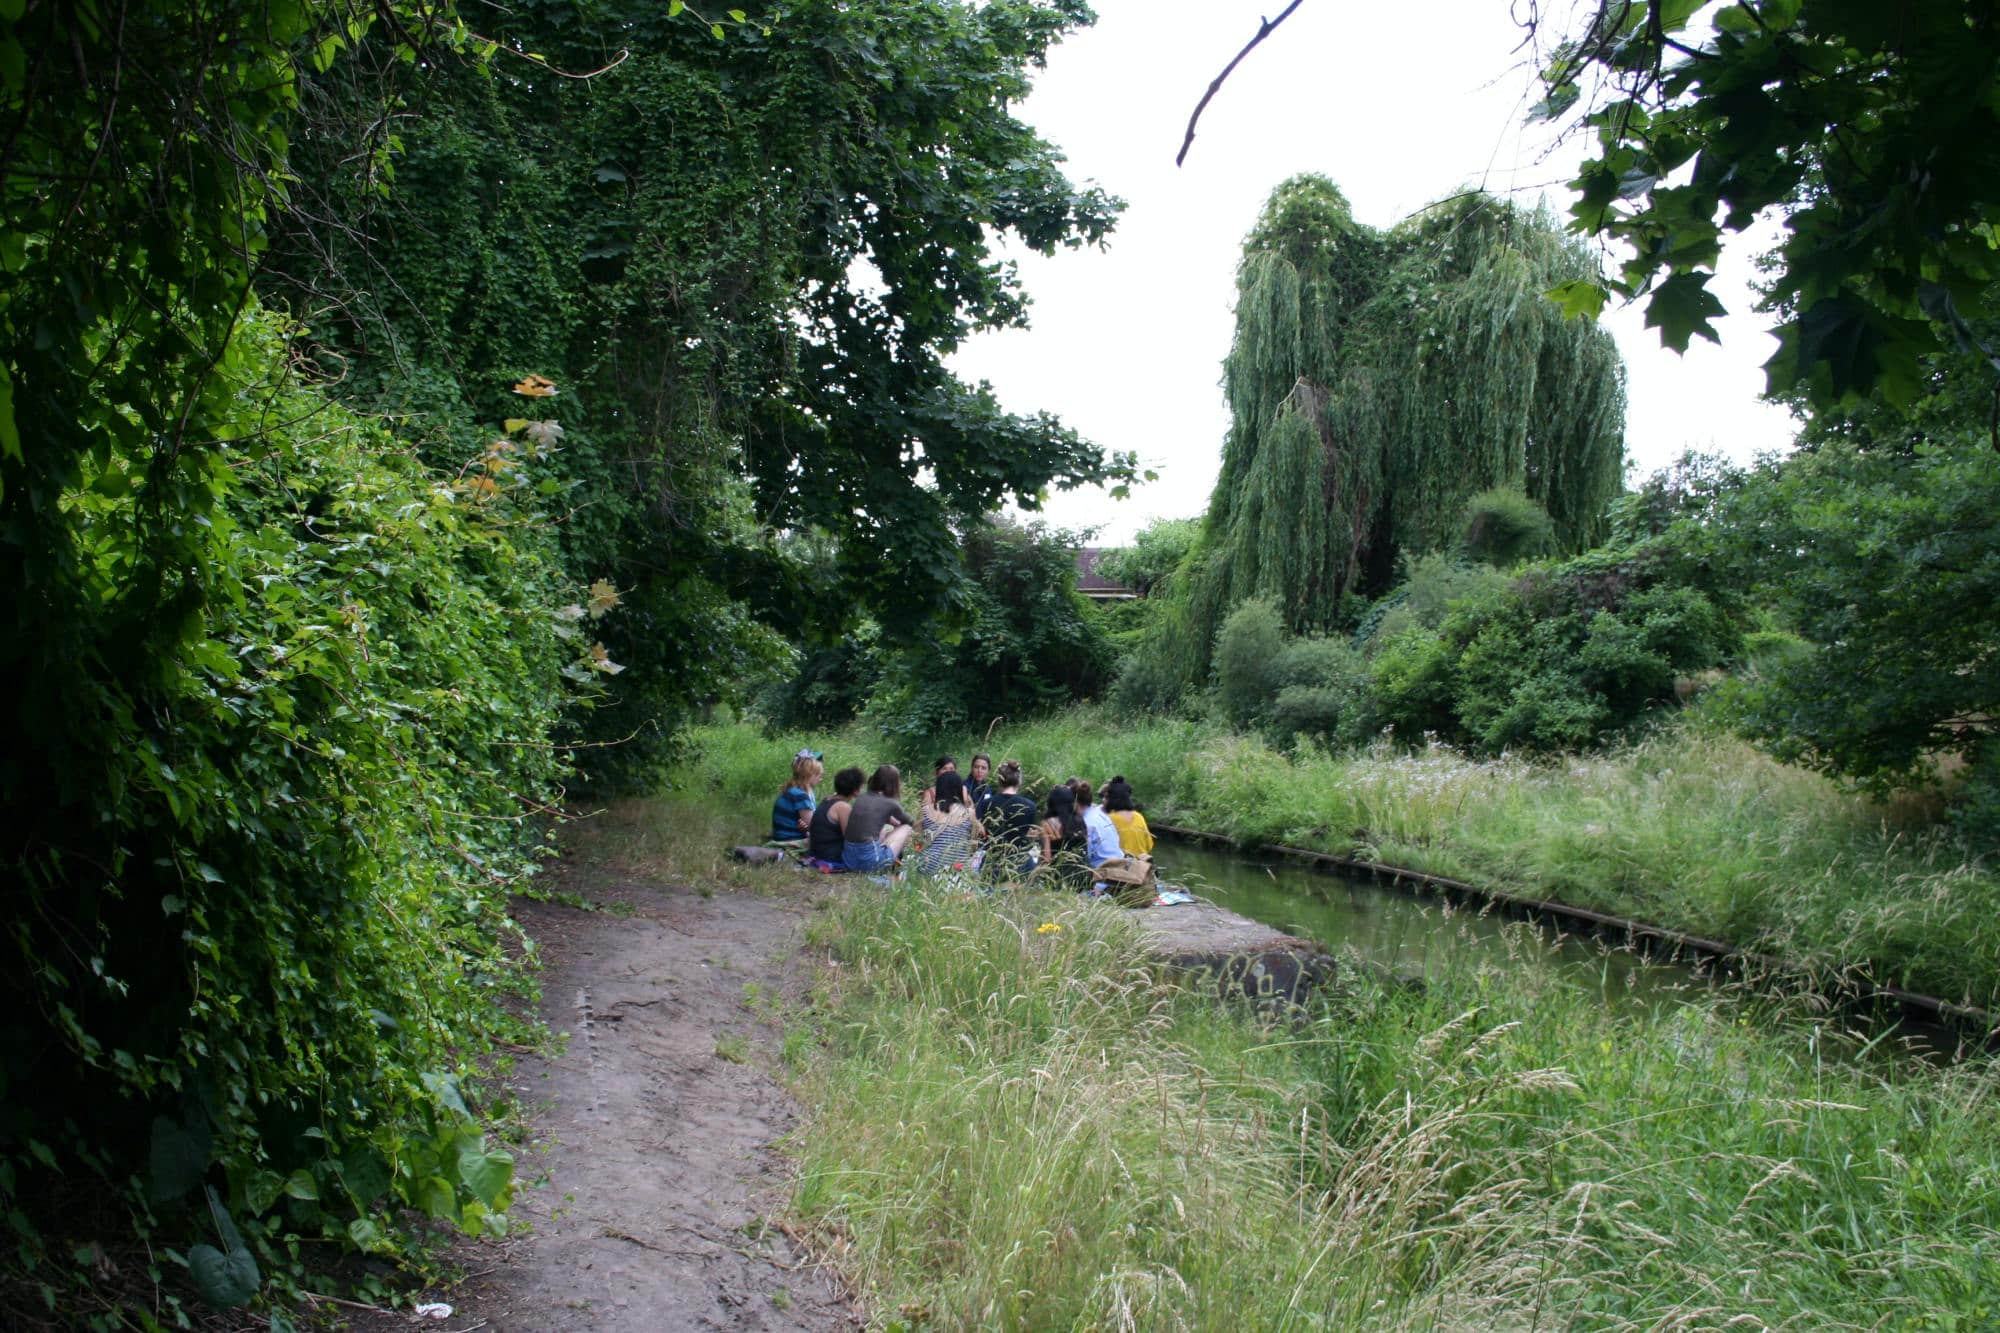 a group of people seated in a wild park like area besides a small river